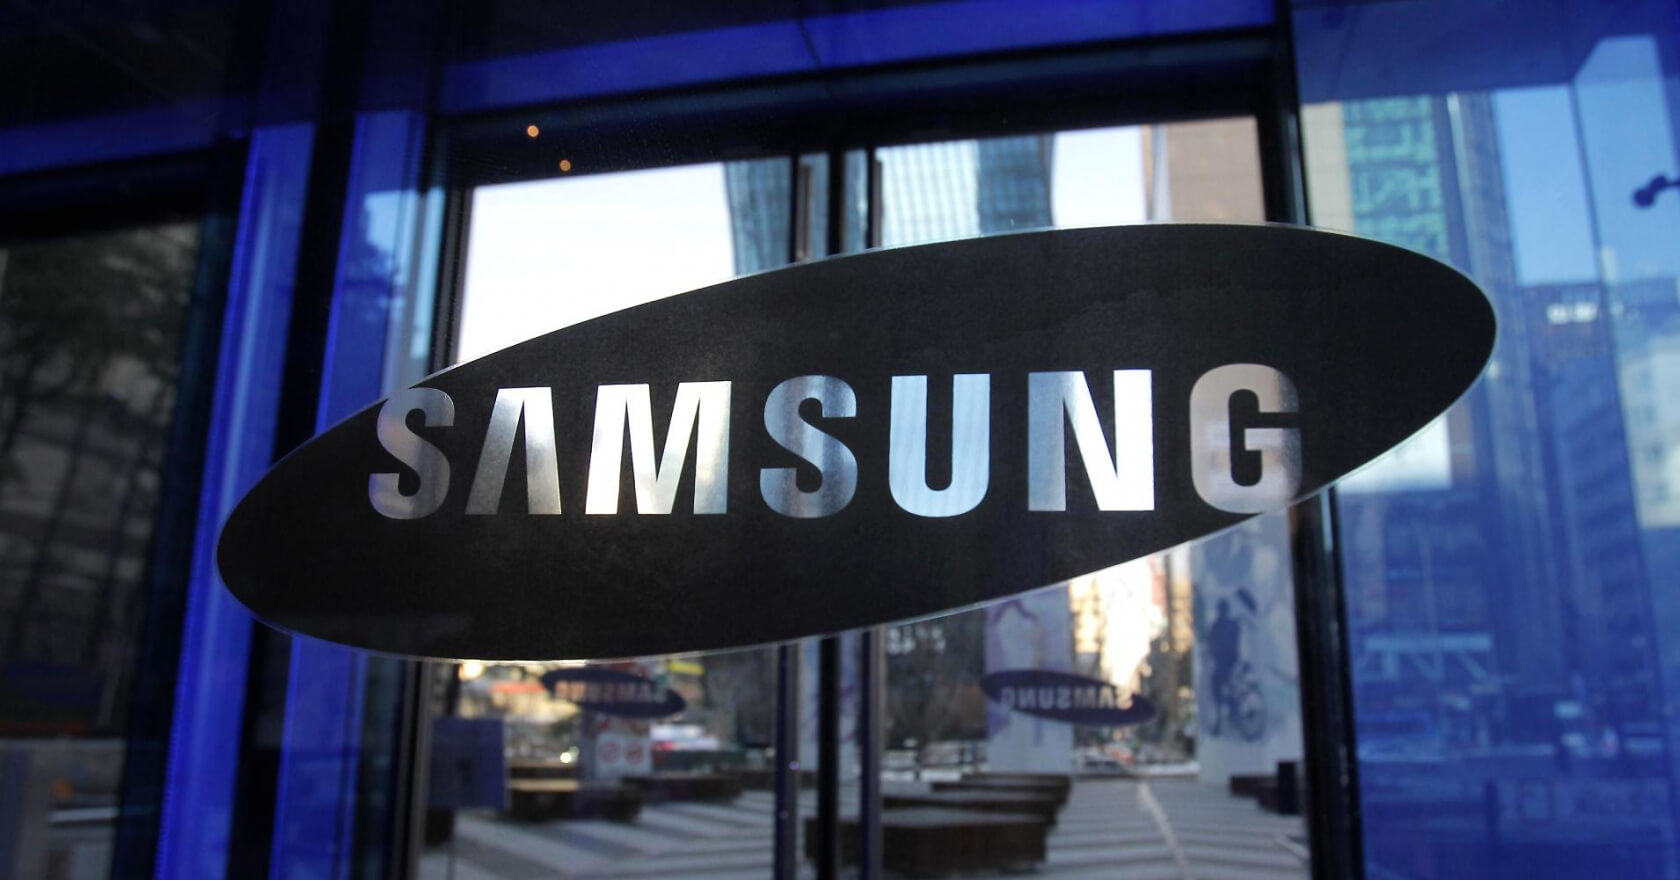 Samsung posts record profits for Q4, overtakes Intel as world's biggest chipmaker